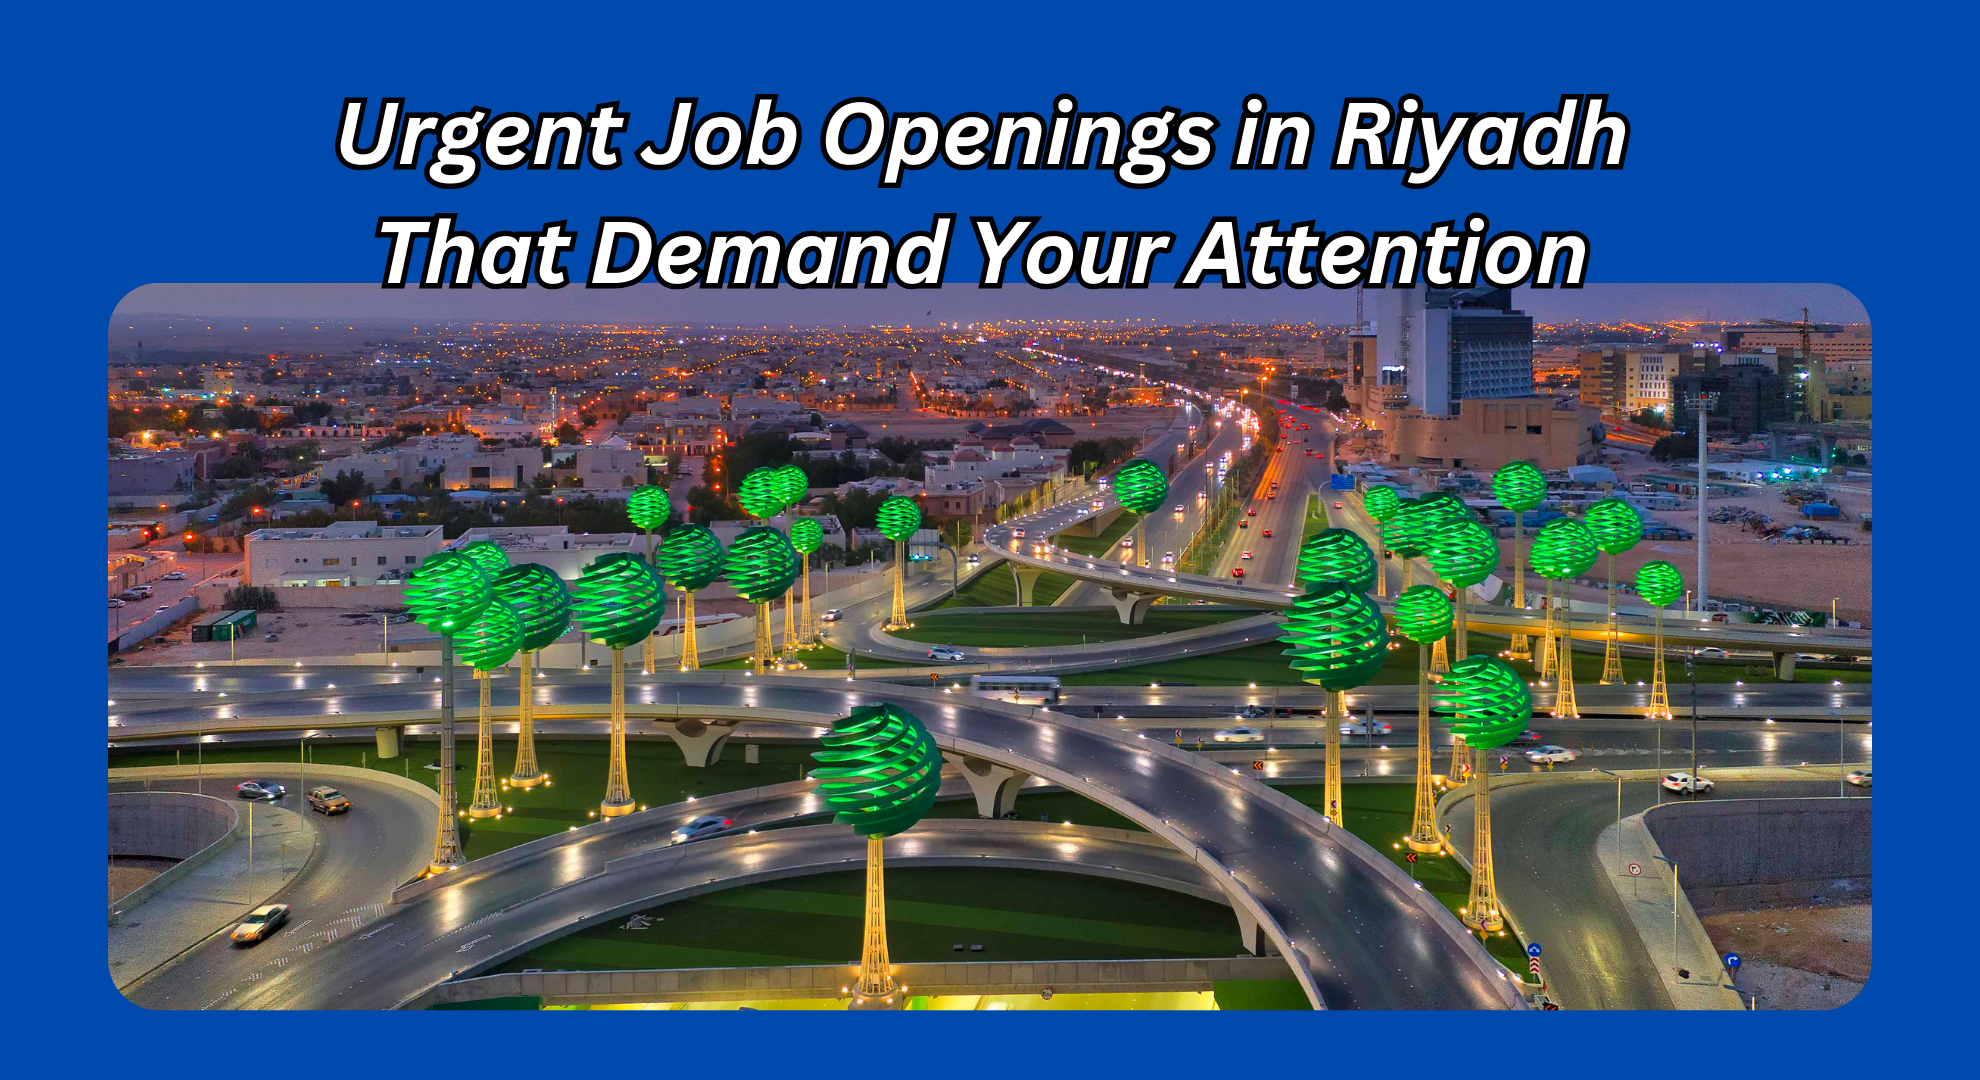 Urgent Job Openings in Riyadh That Demand Your Attention